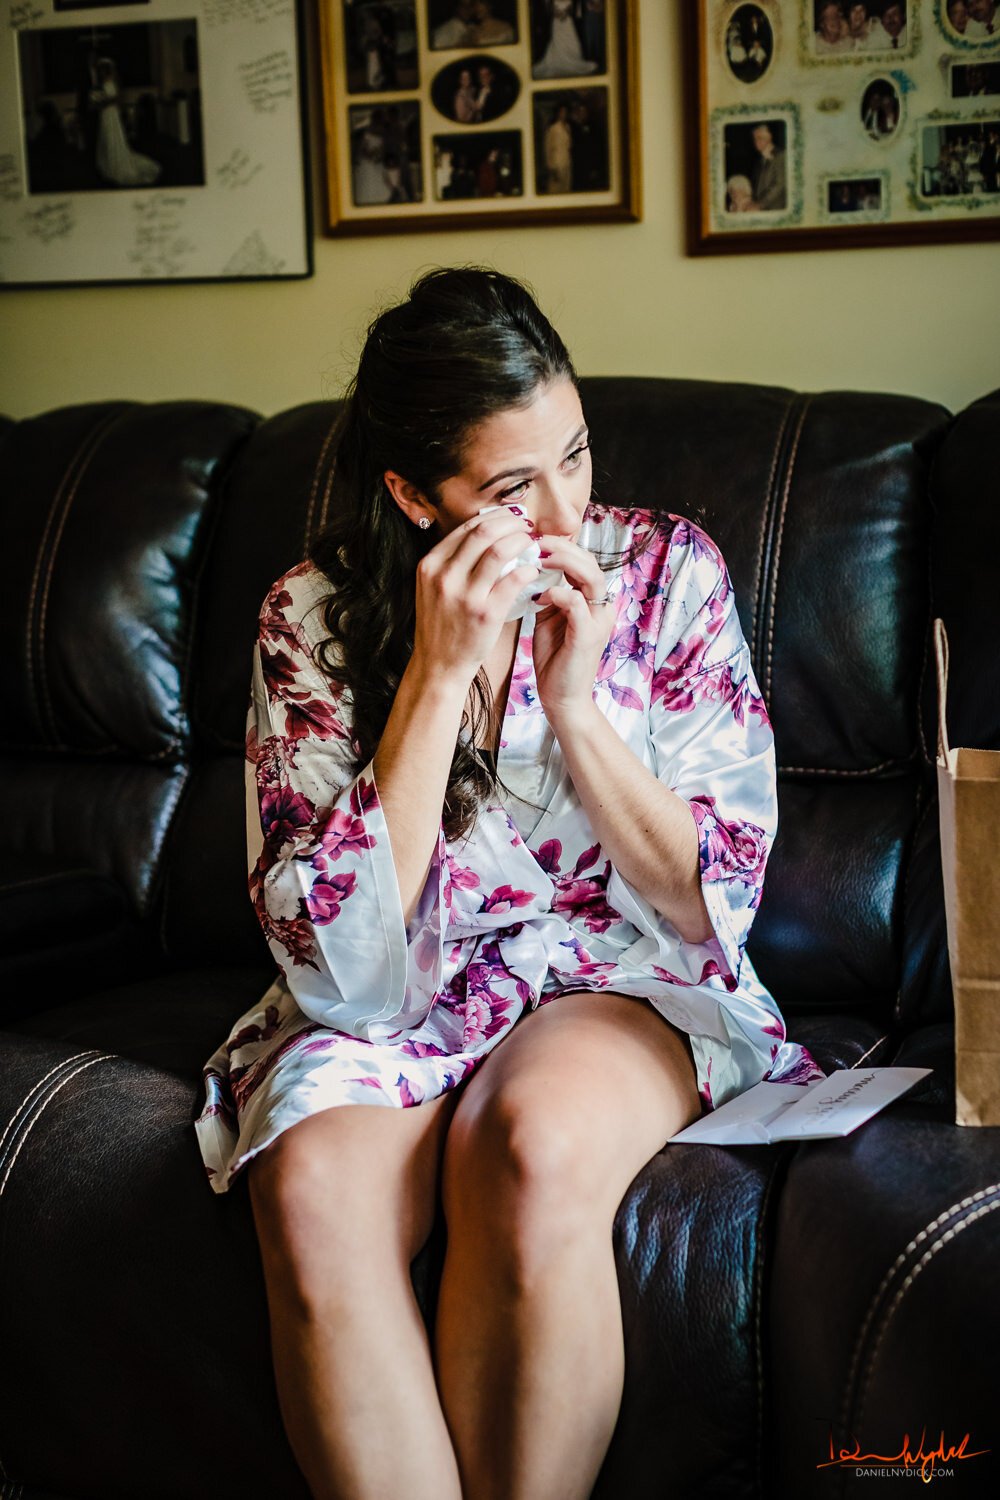 bride crying when opening gifts from groom nj wedding